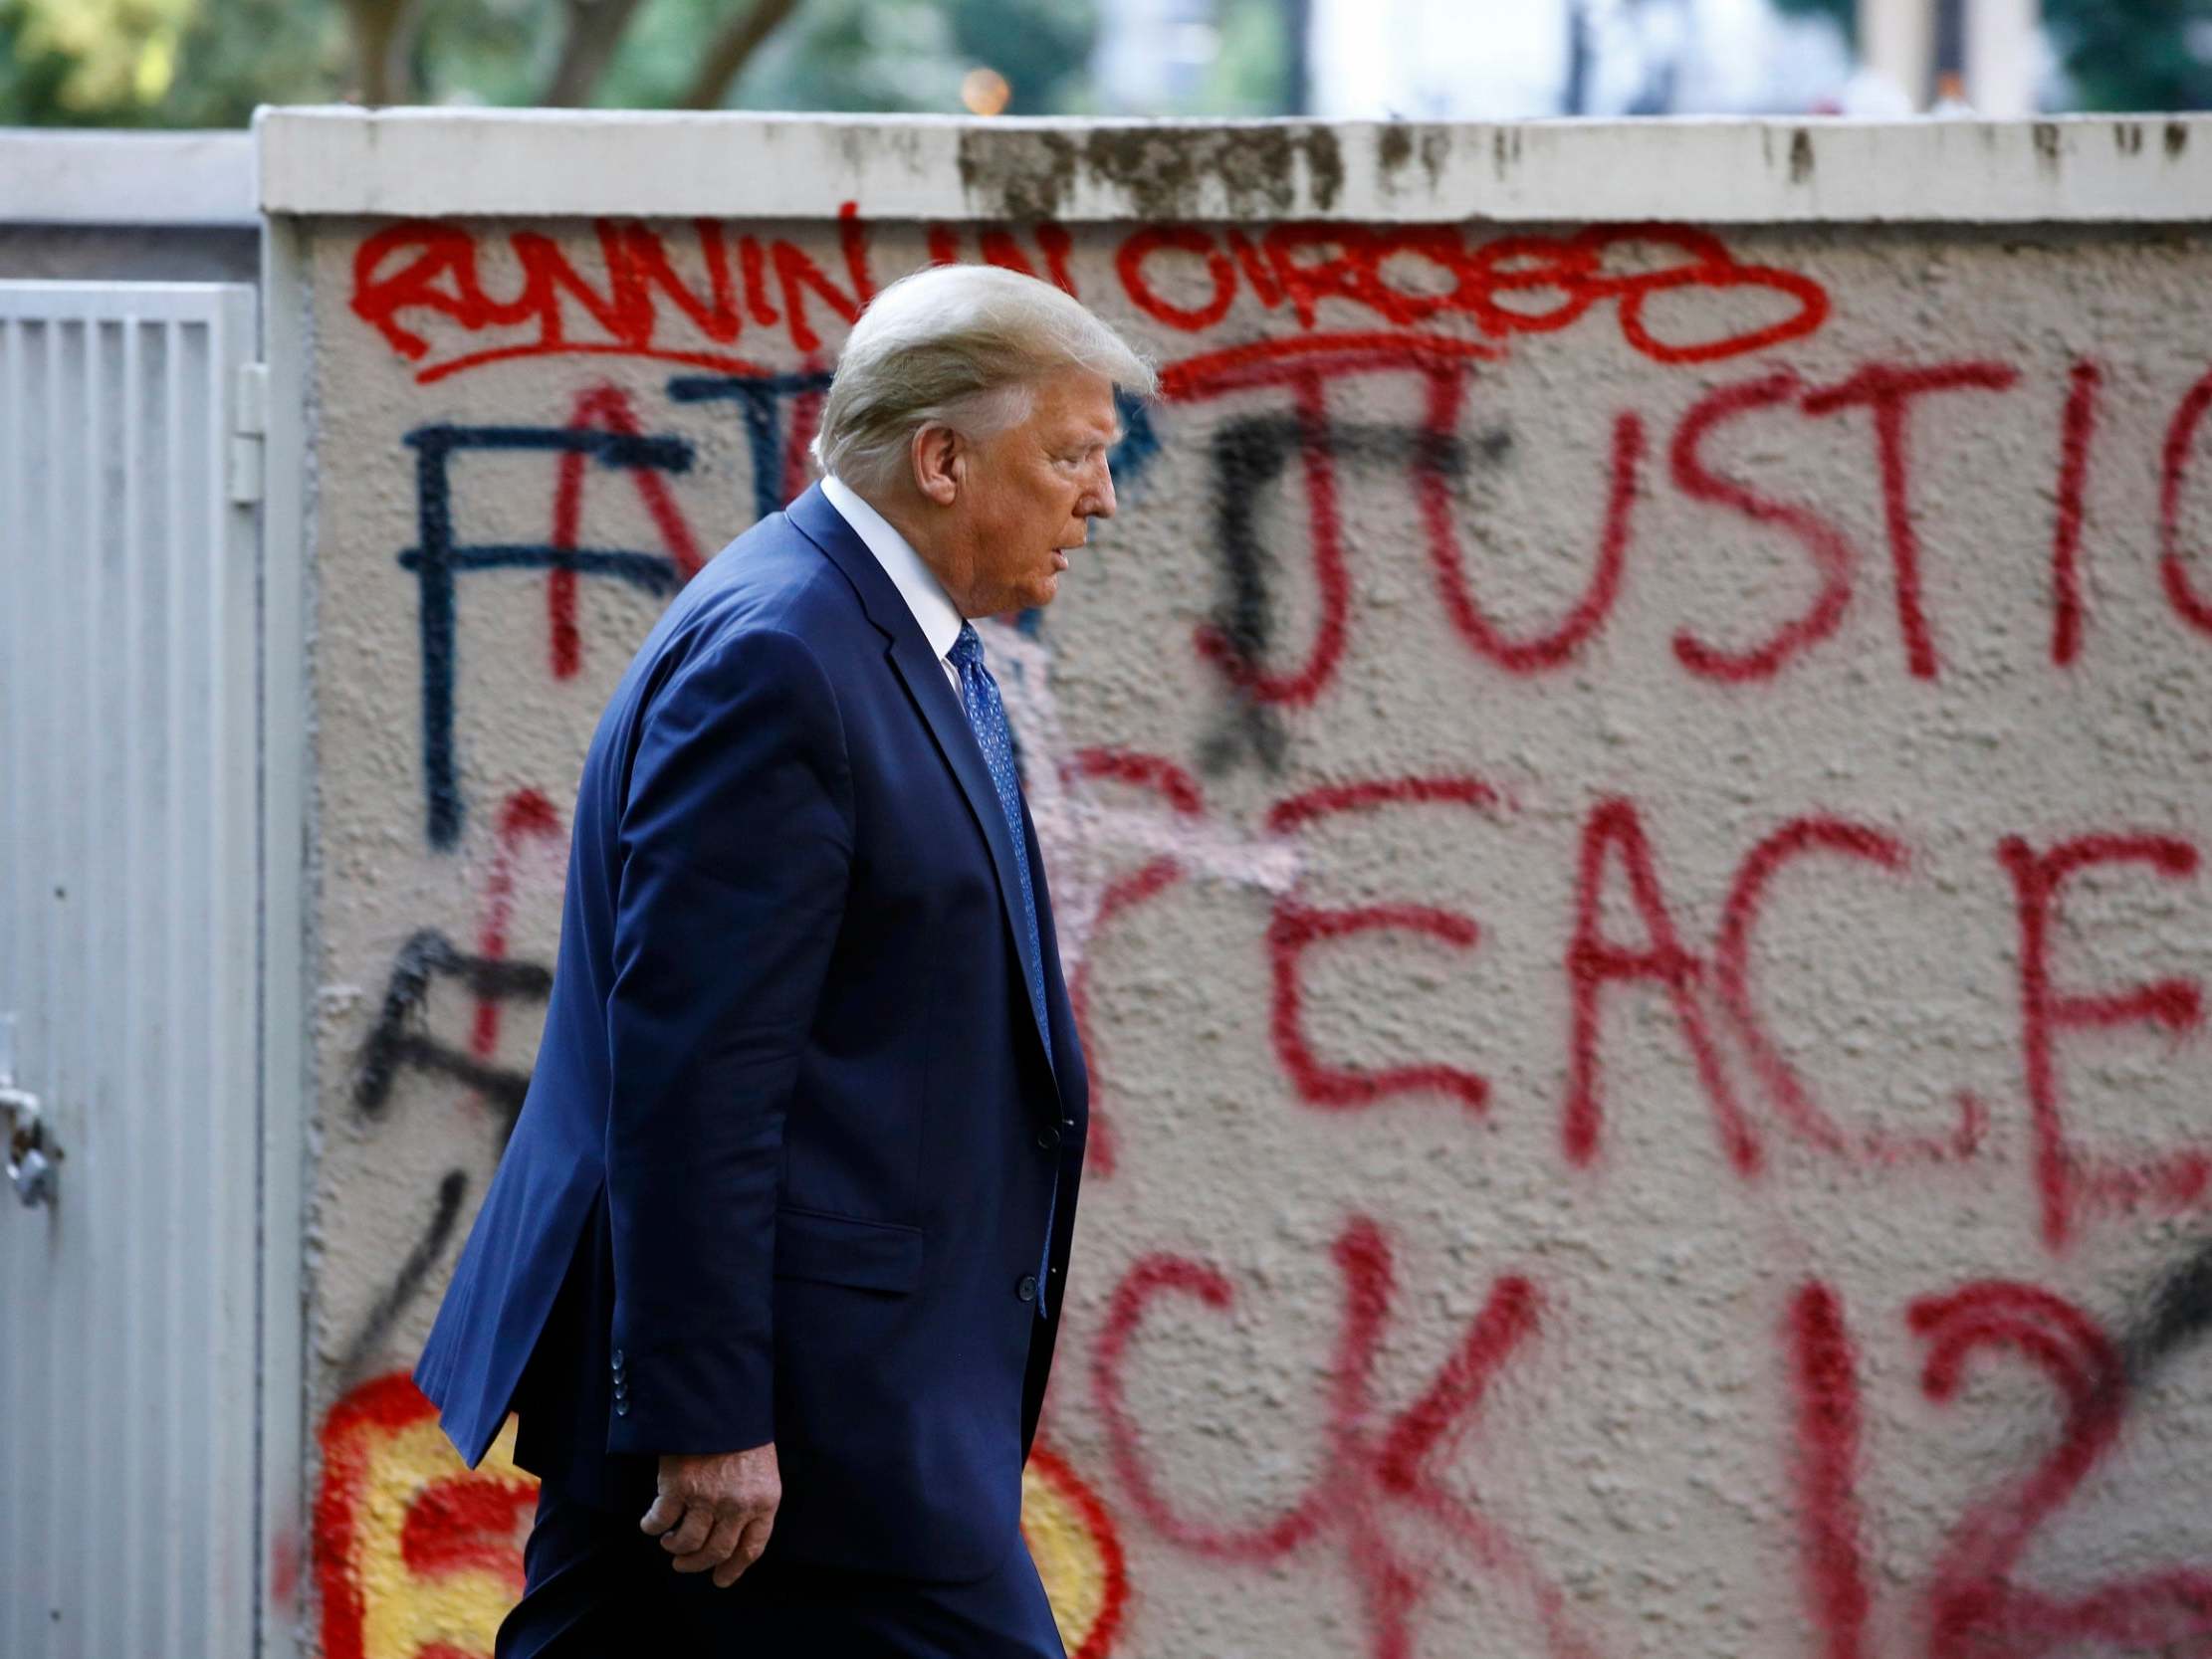 Donald Trump blamed left-wing groups for protest disturbances